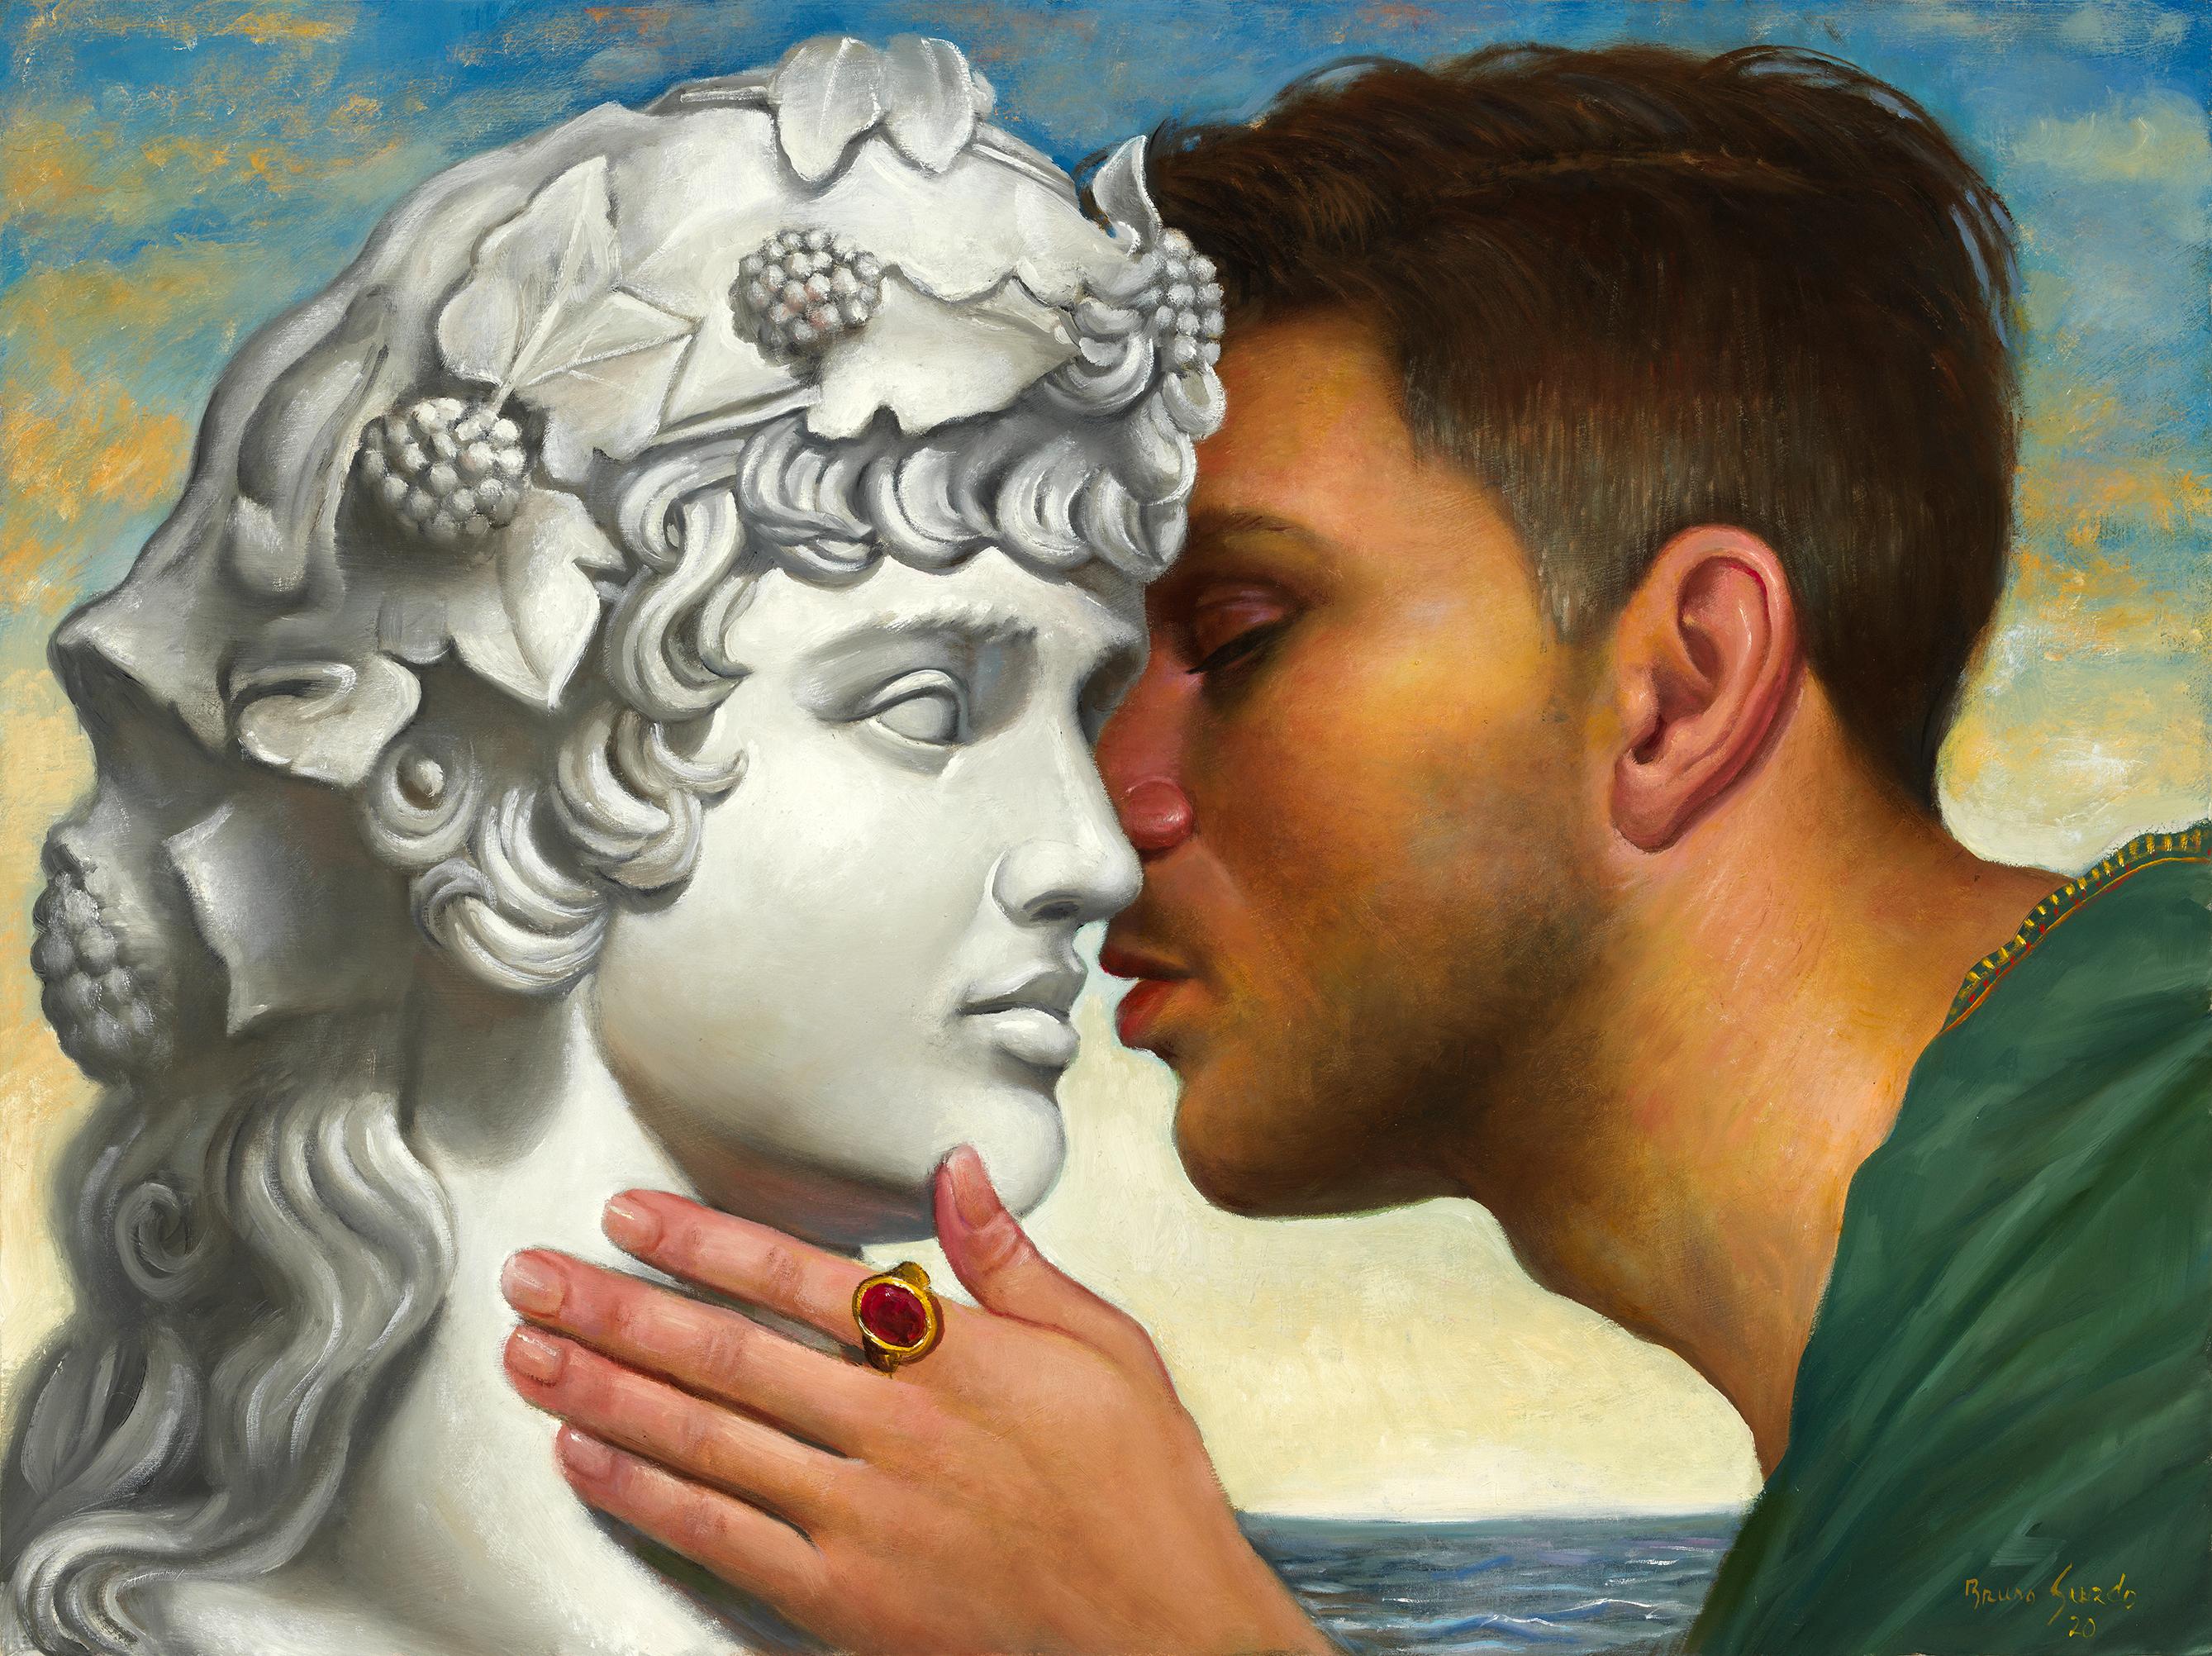 Bruno Surdo Portrait Painting - The Hidden Love of Hadrian and Antinous, Male Embracing a Statue, Oil on Canvas